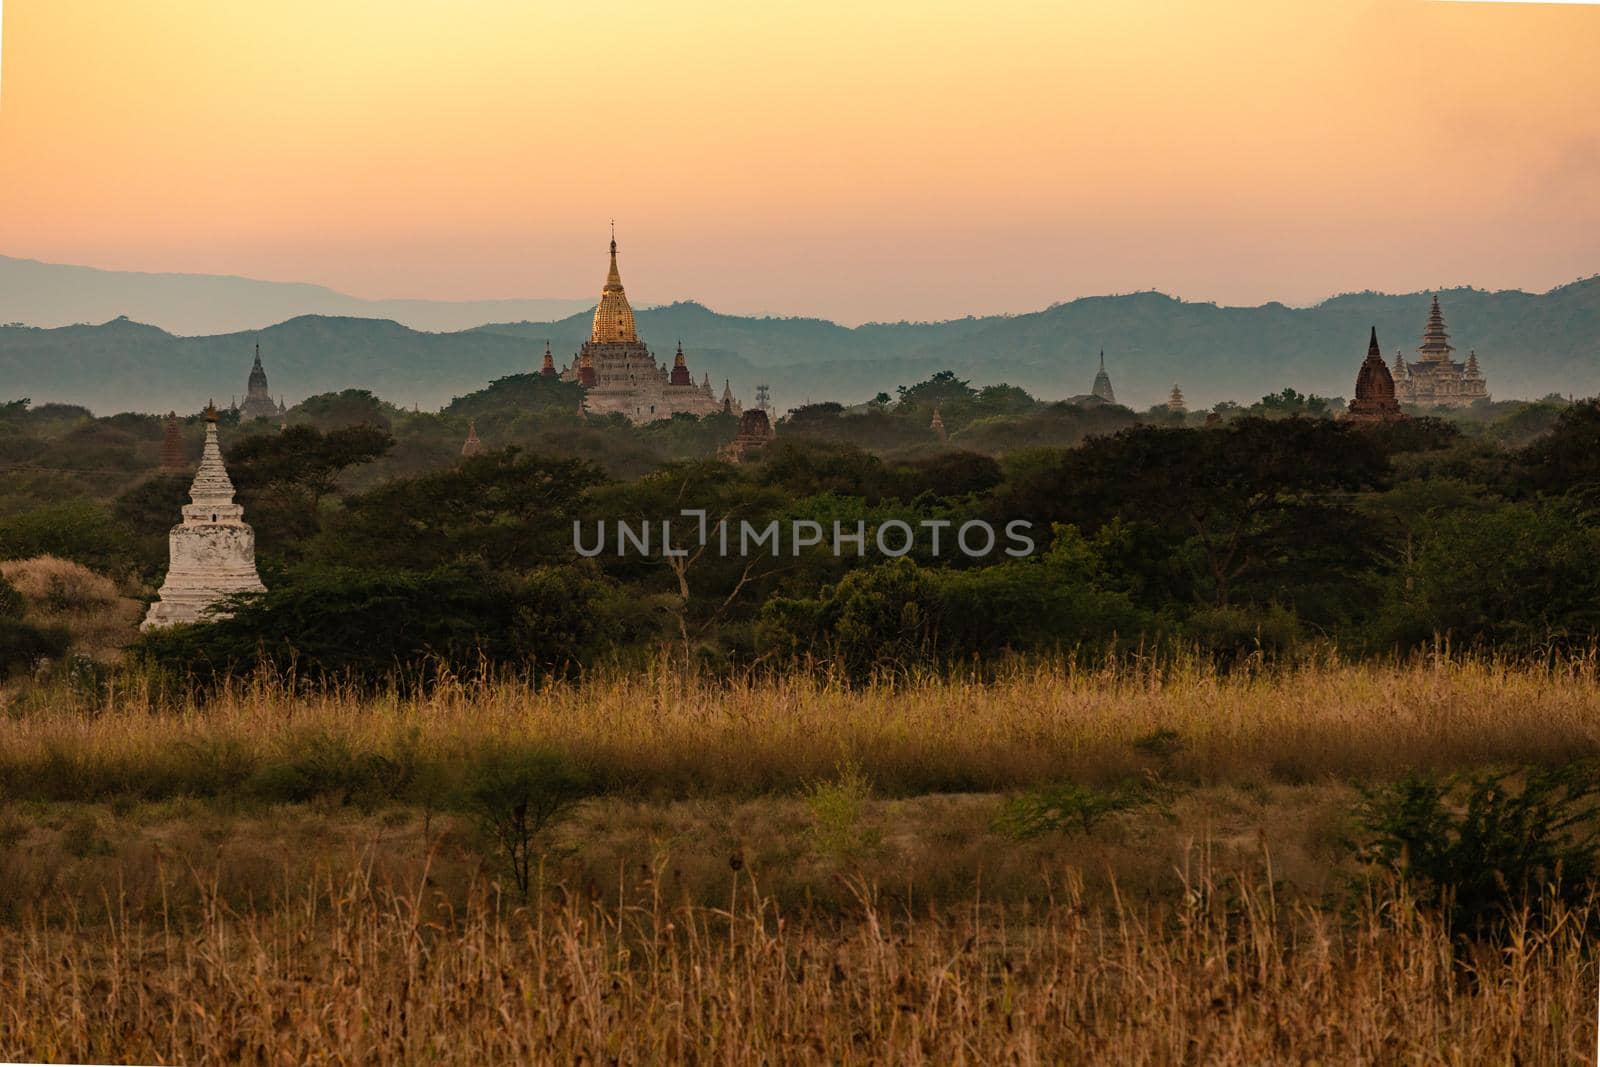 The Ananda Temple in Bagan, Burmese, in the evening light